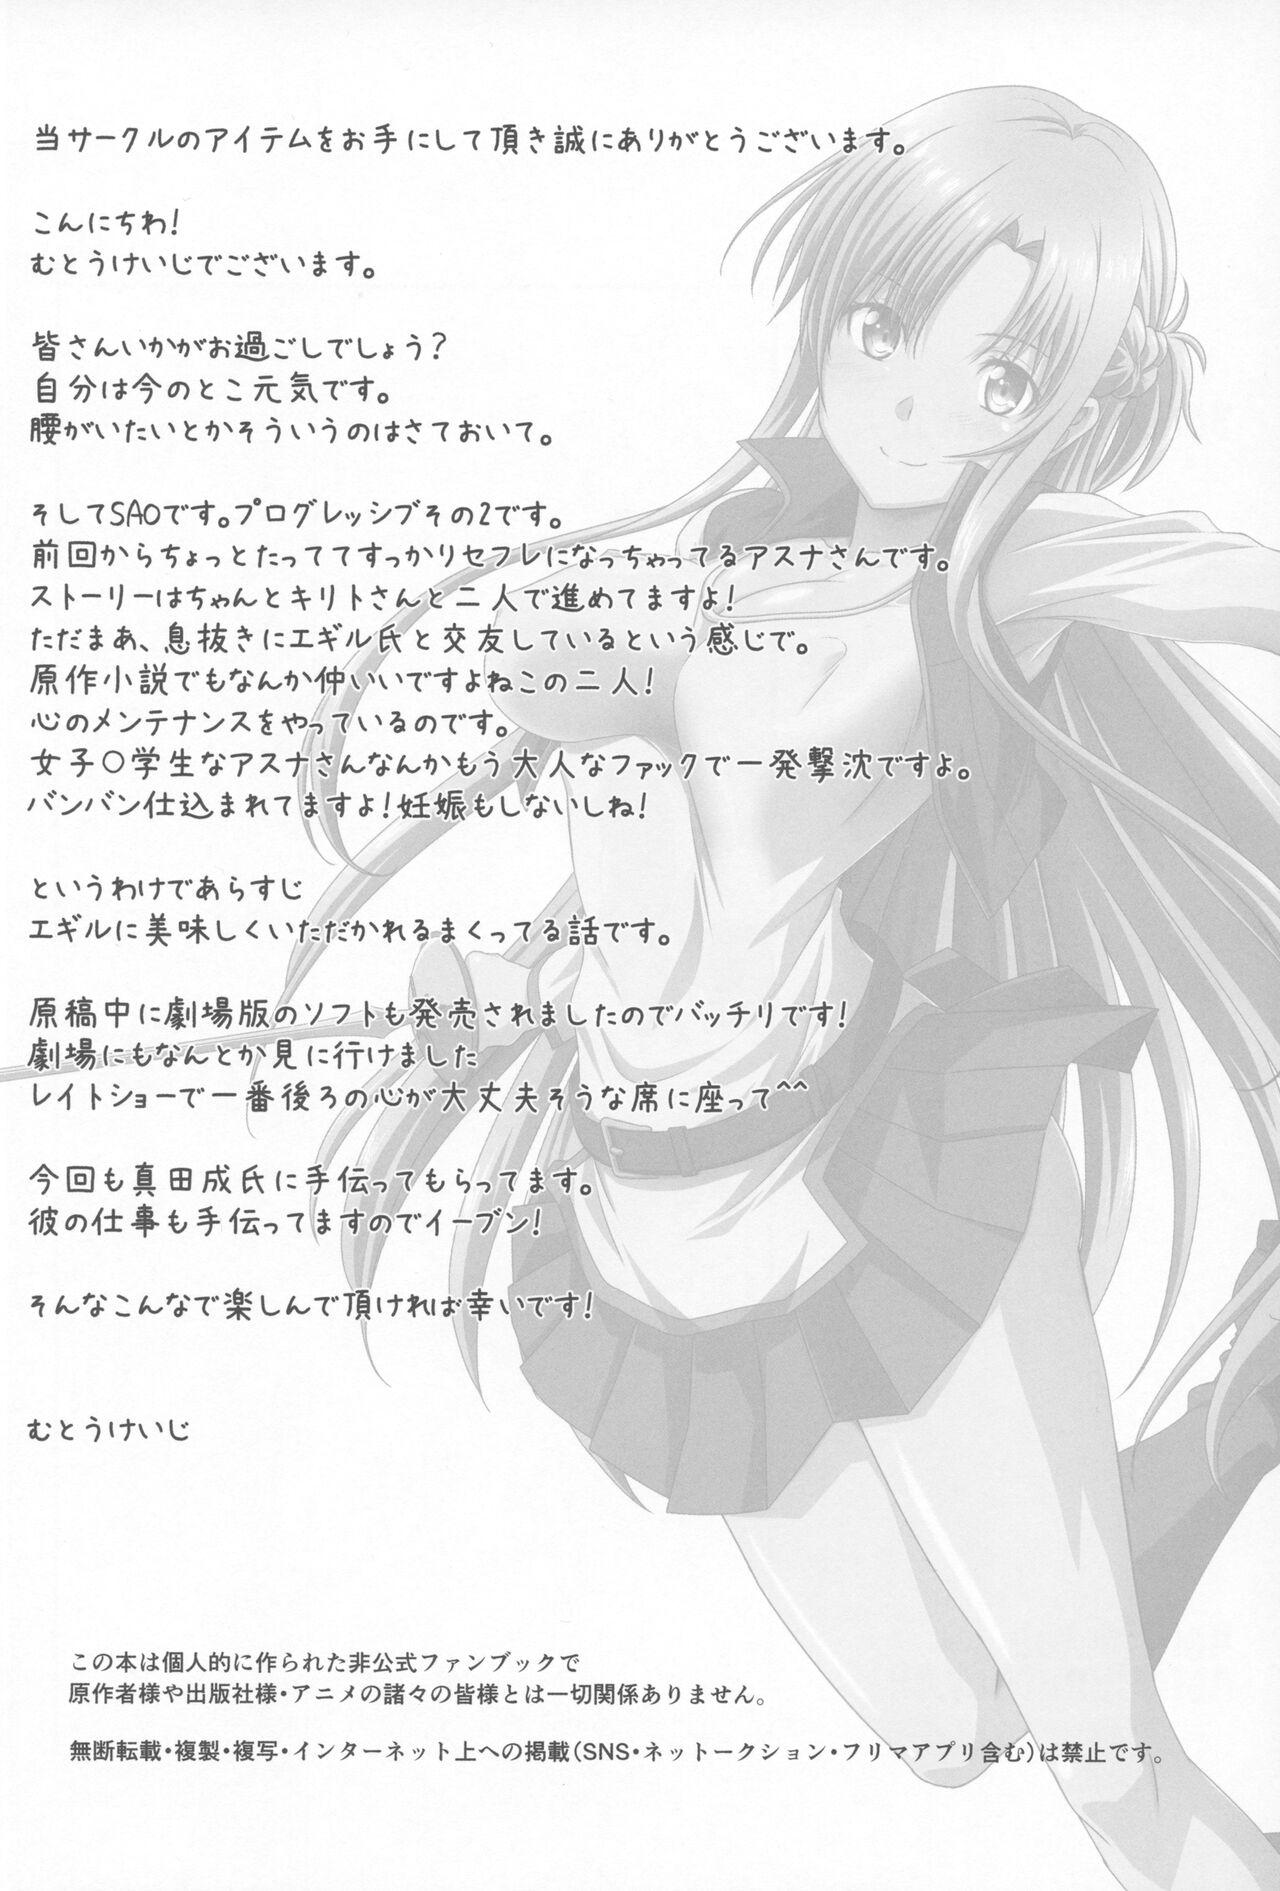 Gaystraight Astral Bout Ver. 45 - Sword art online Pau - Picture 3